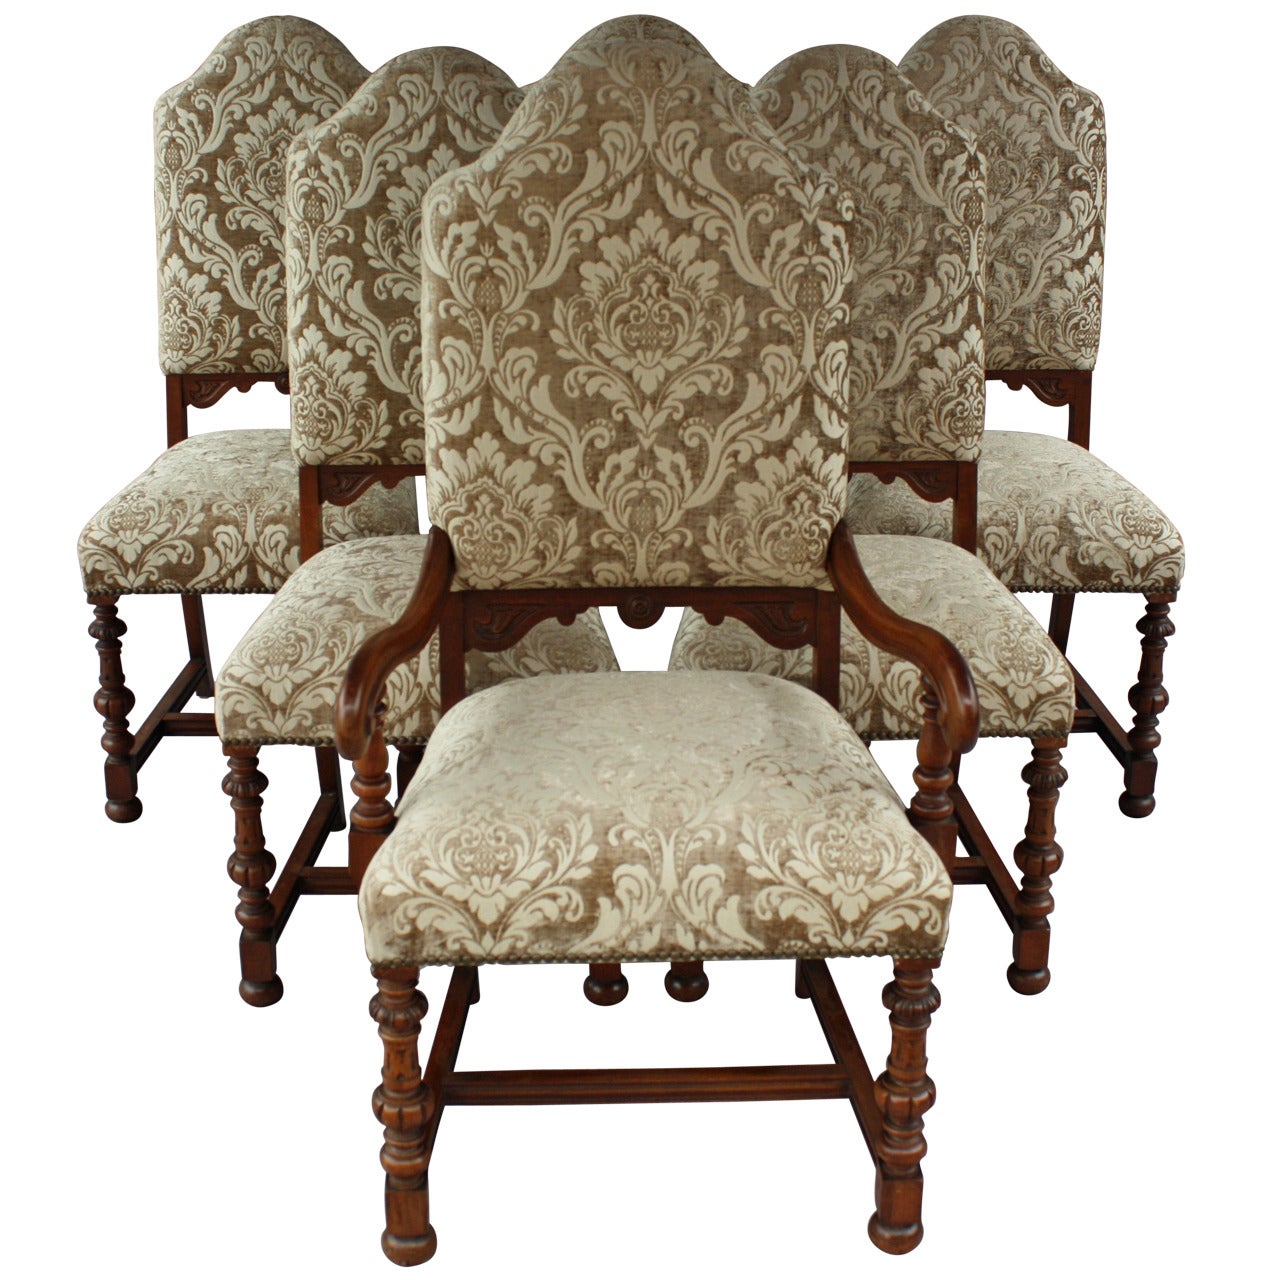 Set of Six 1920s Upholstered Chairs